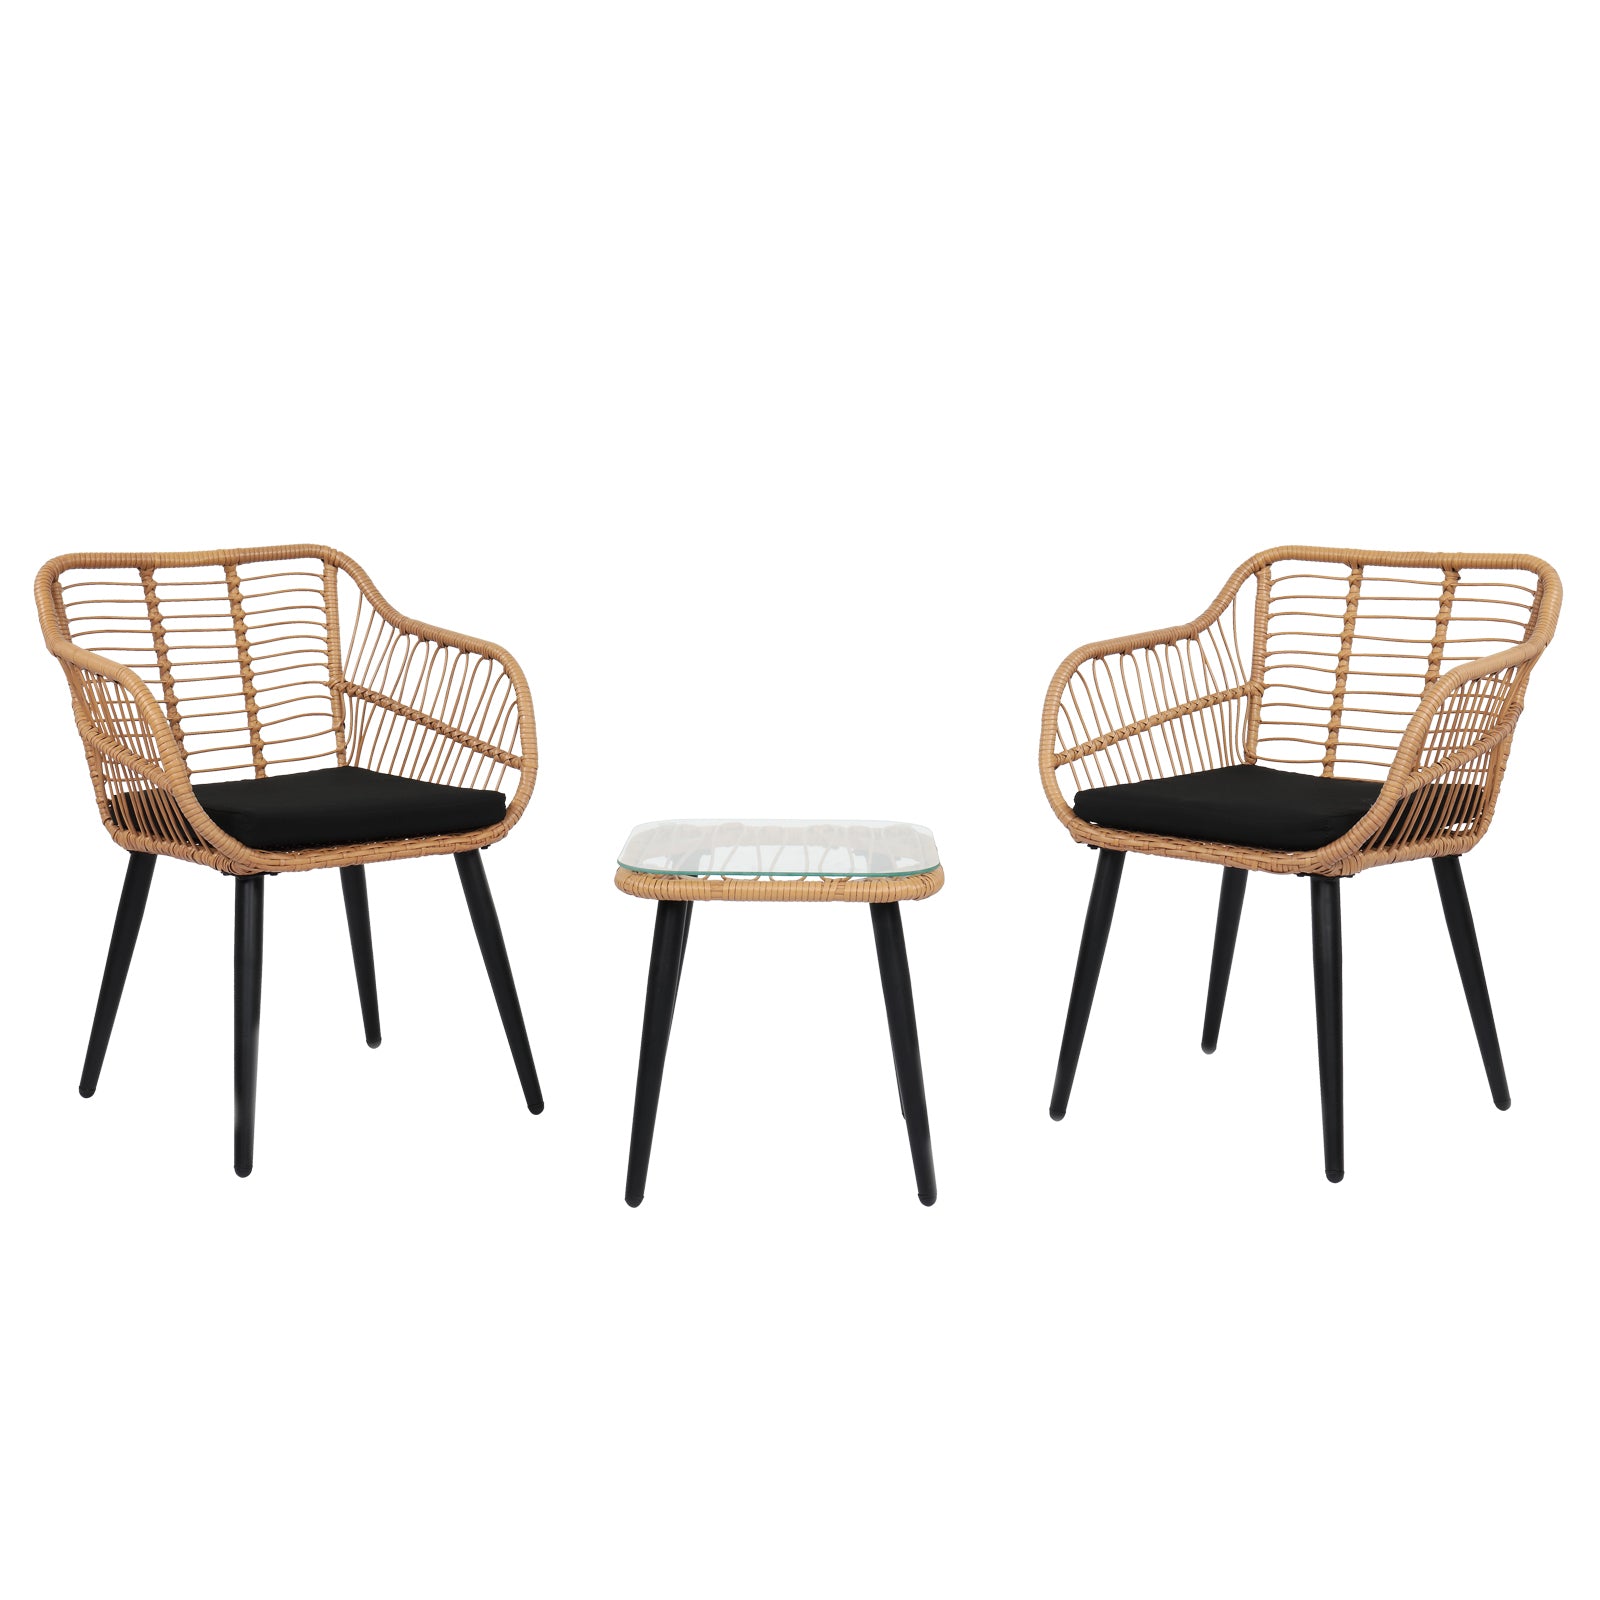 3 Piece Rattan Wicker Bistro Set with Glass Top Table